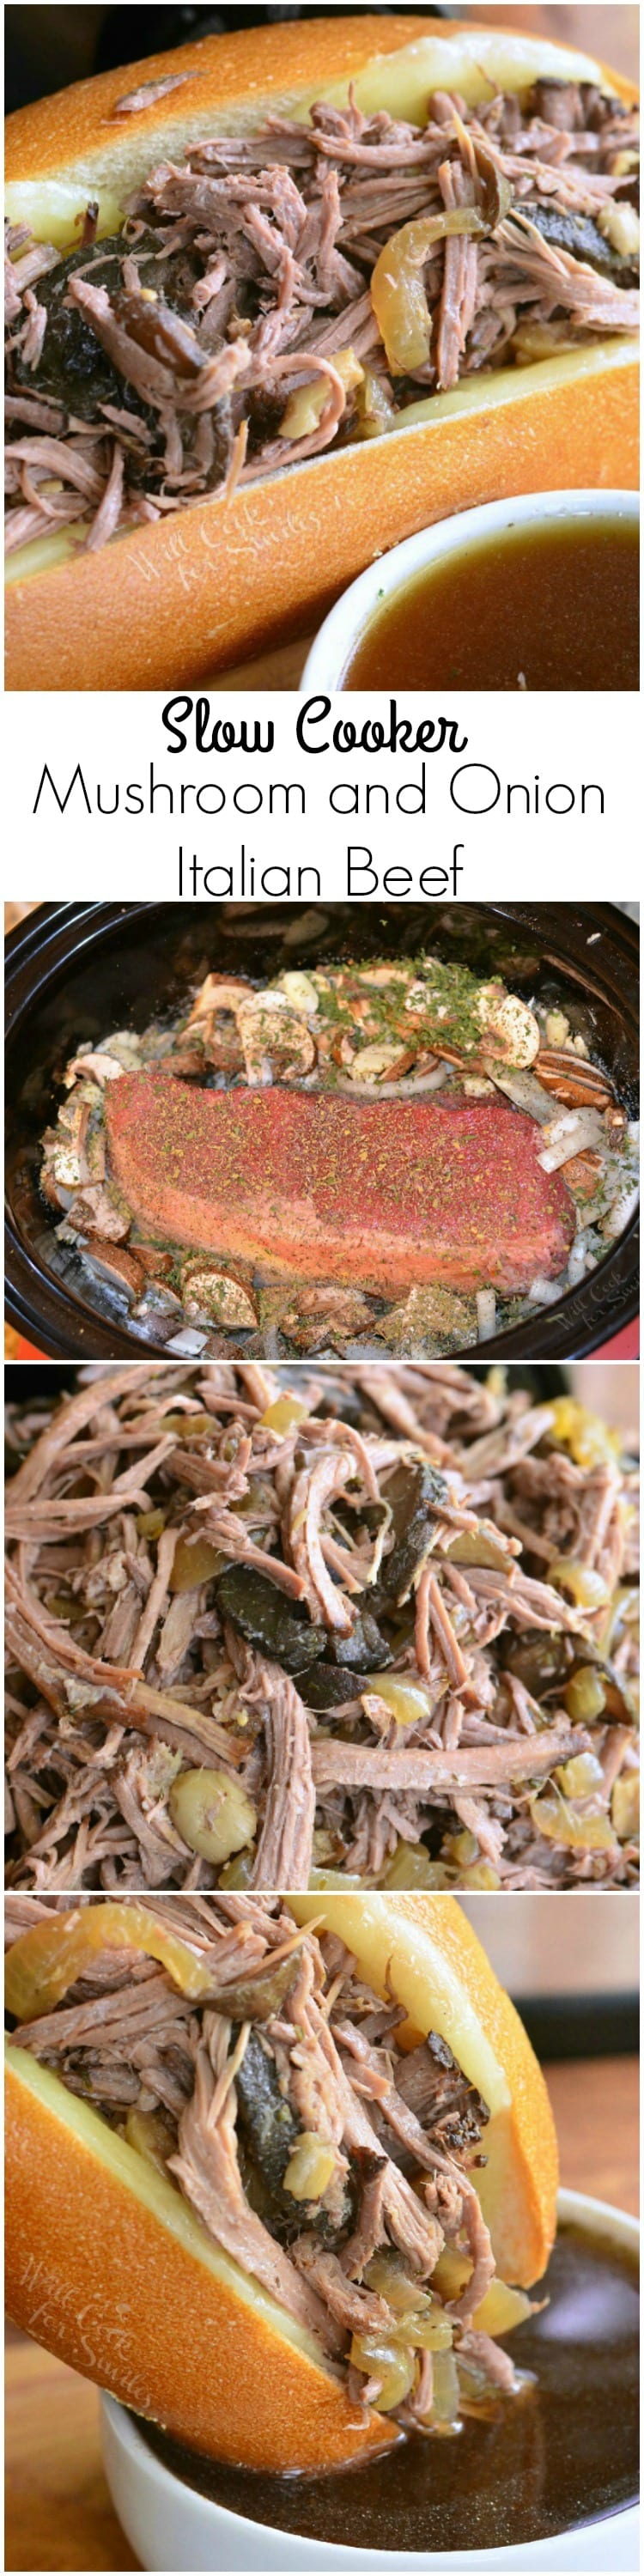 photo collage 1st photo Mushroom and Onion Italian Beef sub and au jus sauce in a white bowl, 2nd photo full beef in slow cooker, 3rd photo cooked beef in a bowl, 4th phot is sandwich being dipped in sauce that is in small white bowl 